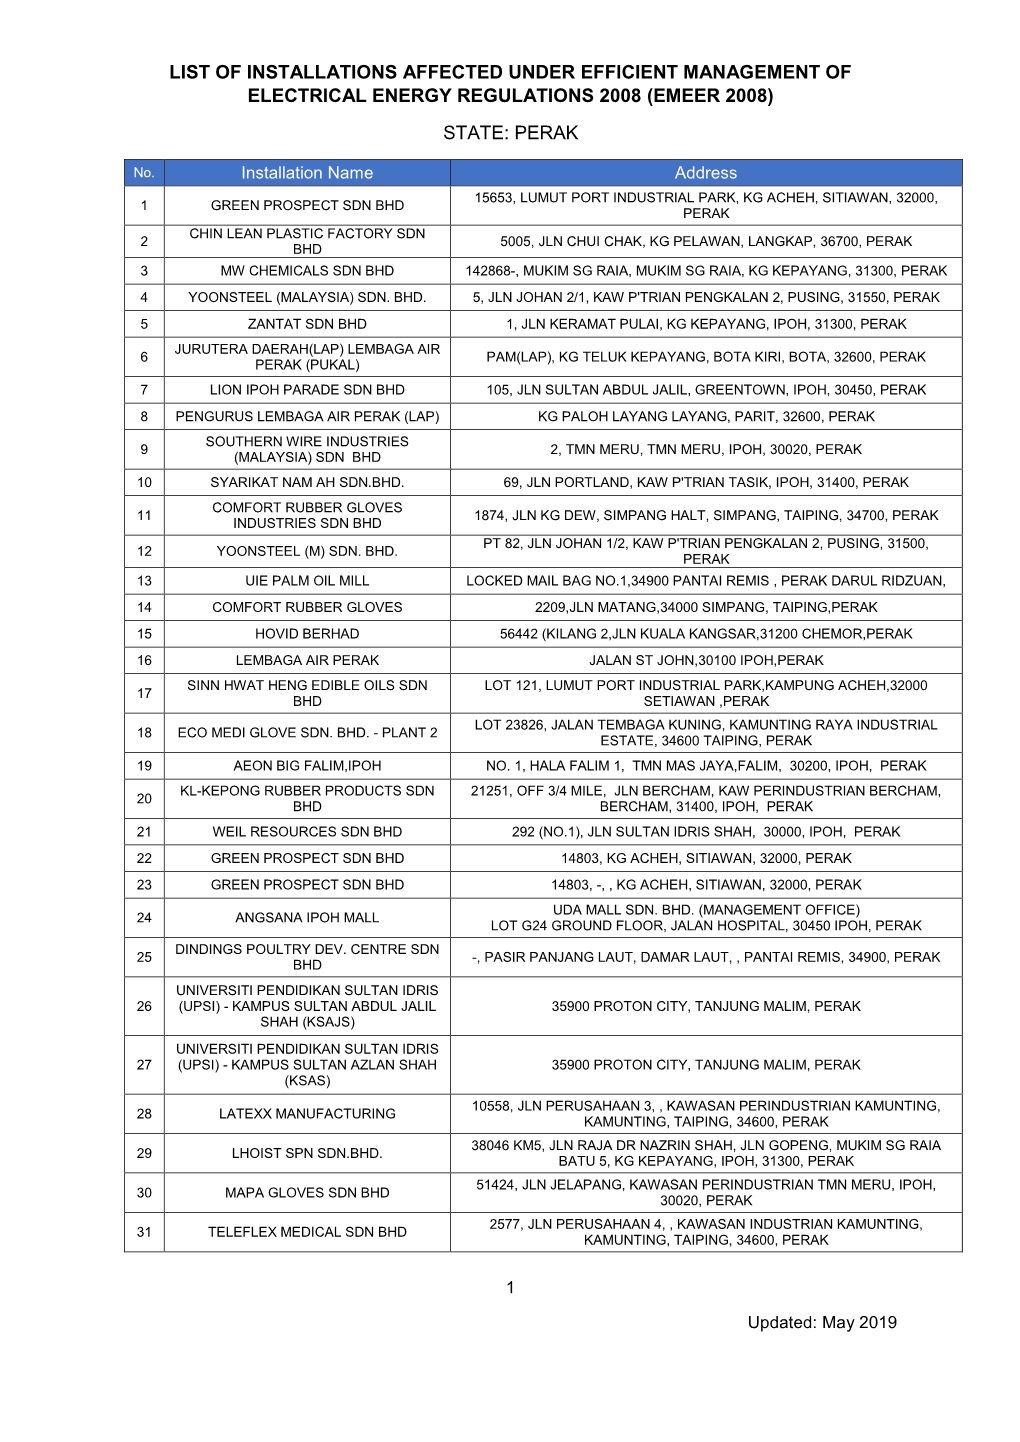 List of Installations Affected Under Efficient Management of Electrical Energy Regulations 2008 (Emeer 2008) State: Perak